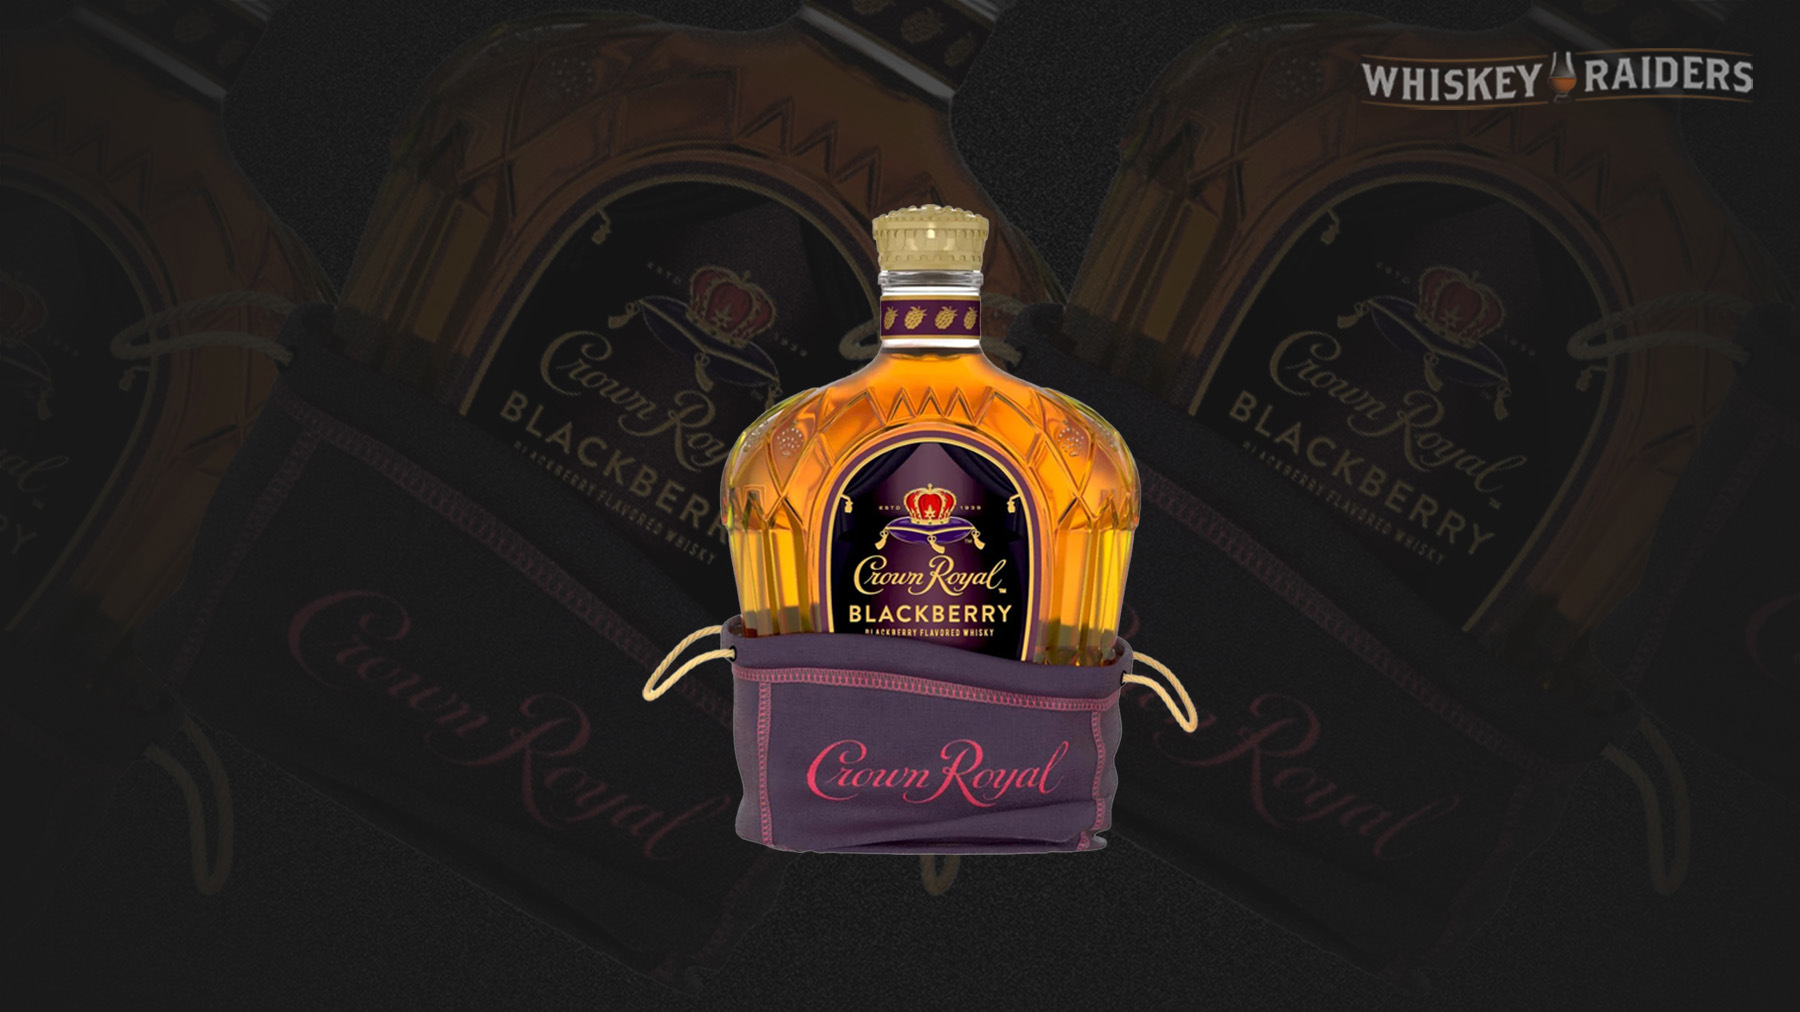 Crown Royal Has a New Blackberry Flavored Whiskey — Here’s What We Know